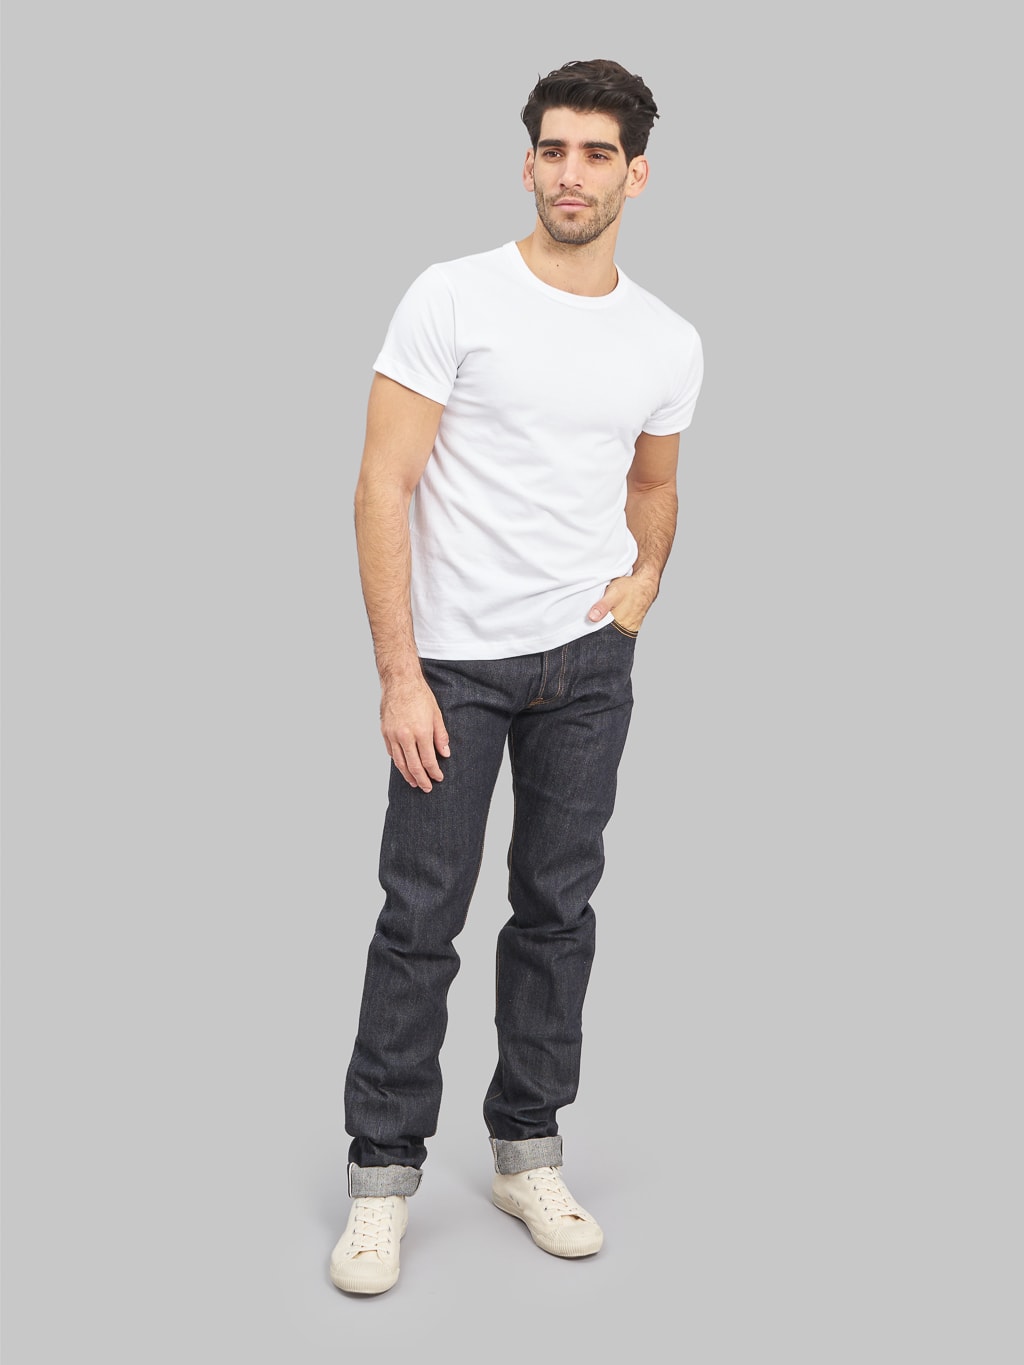 The Flat Head D306 Tight Tapered selvedge Jeans look